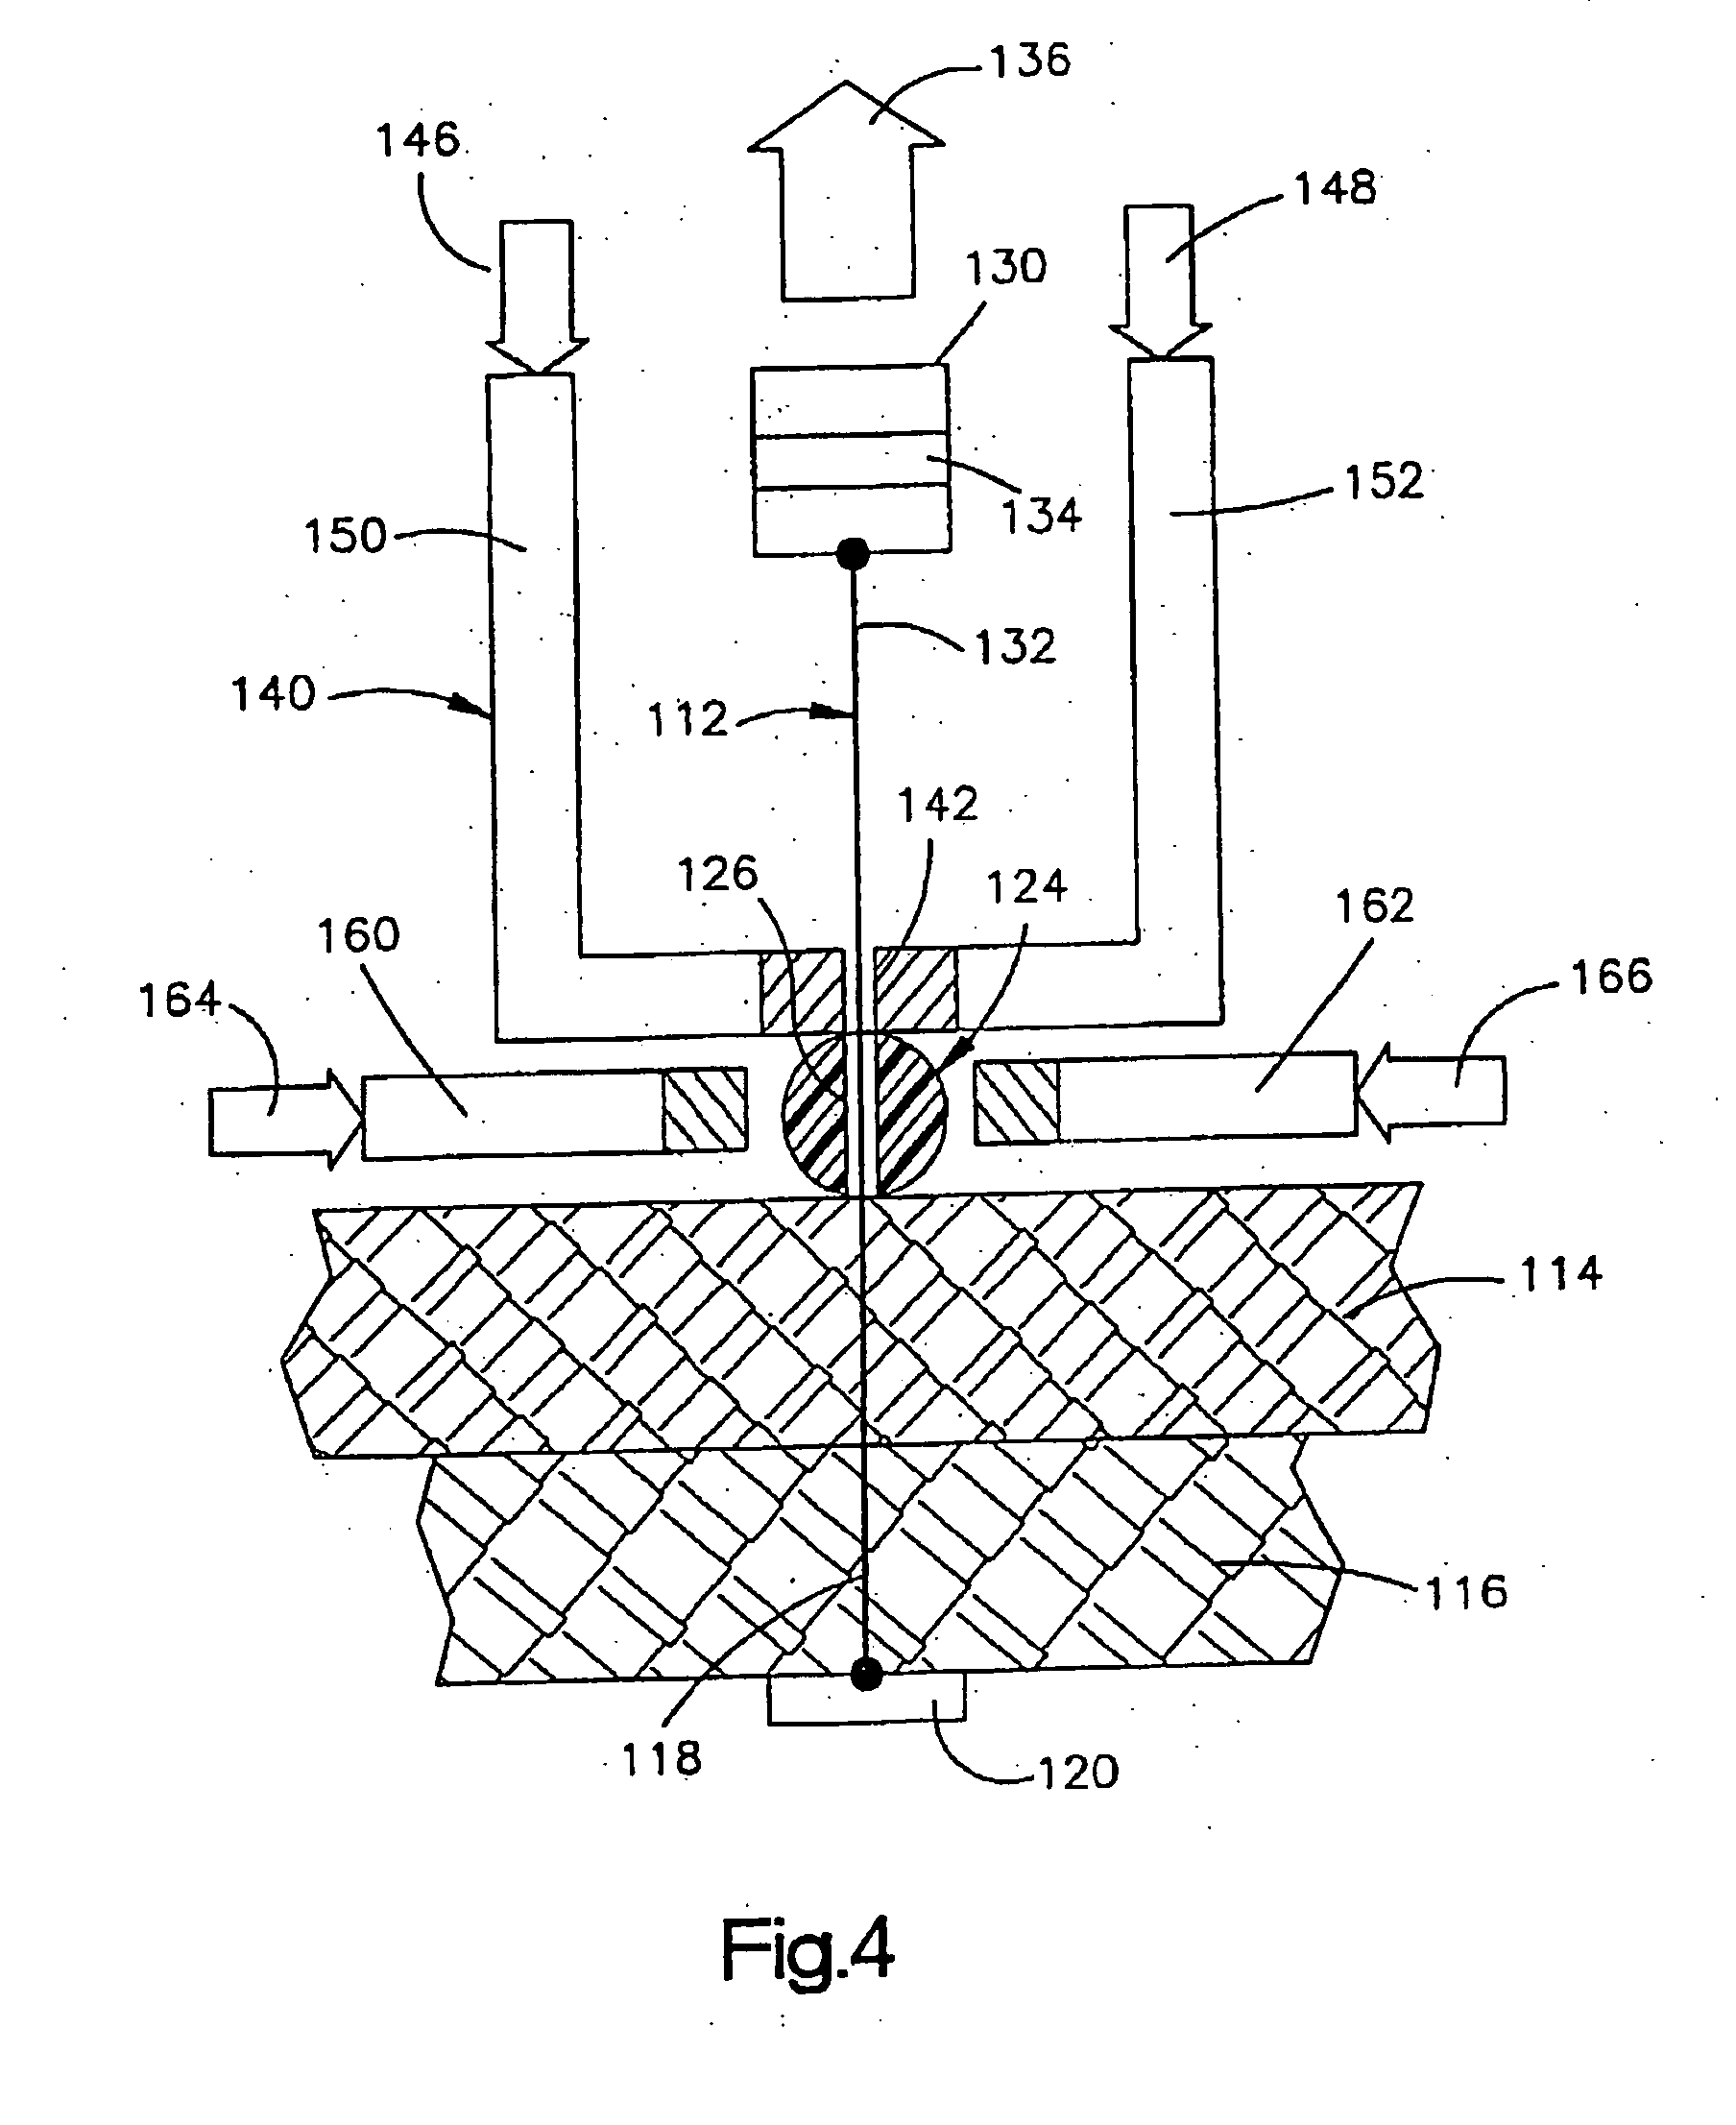 Method of using ultrasonic vibration to secure body tissue